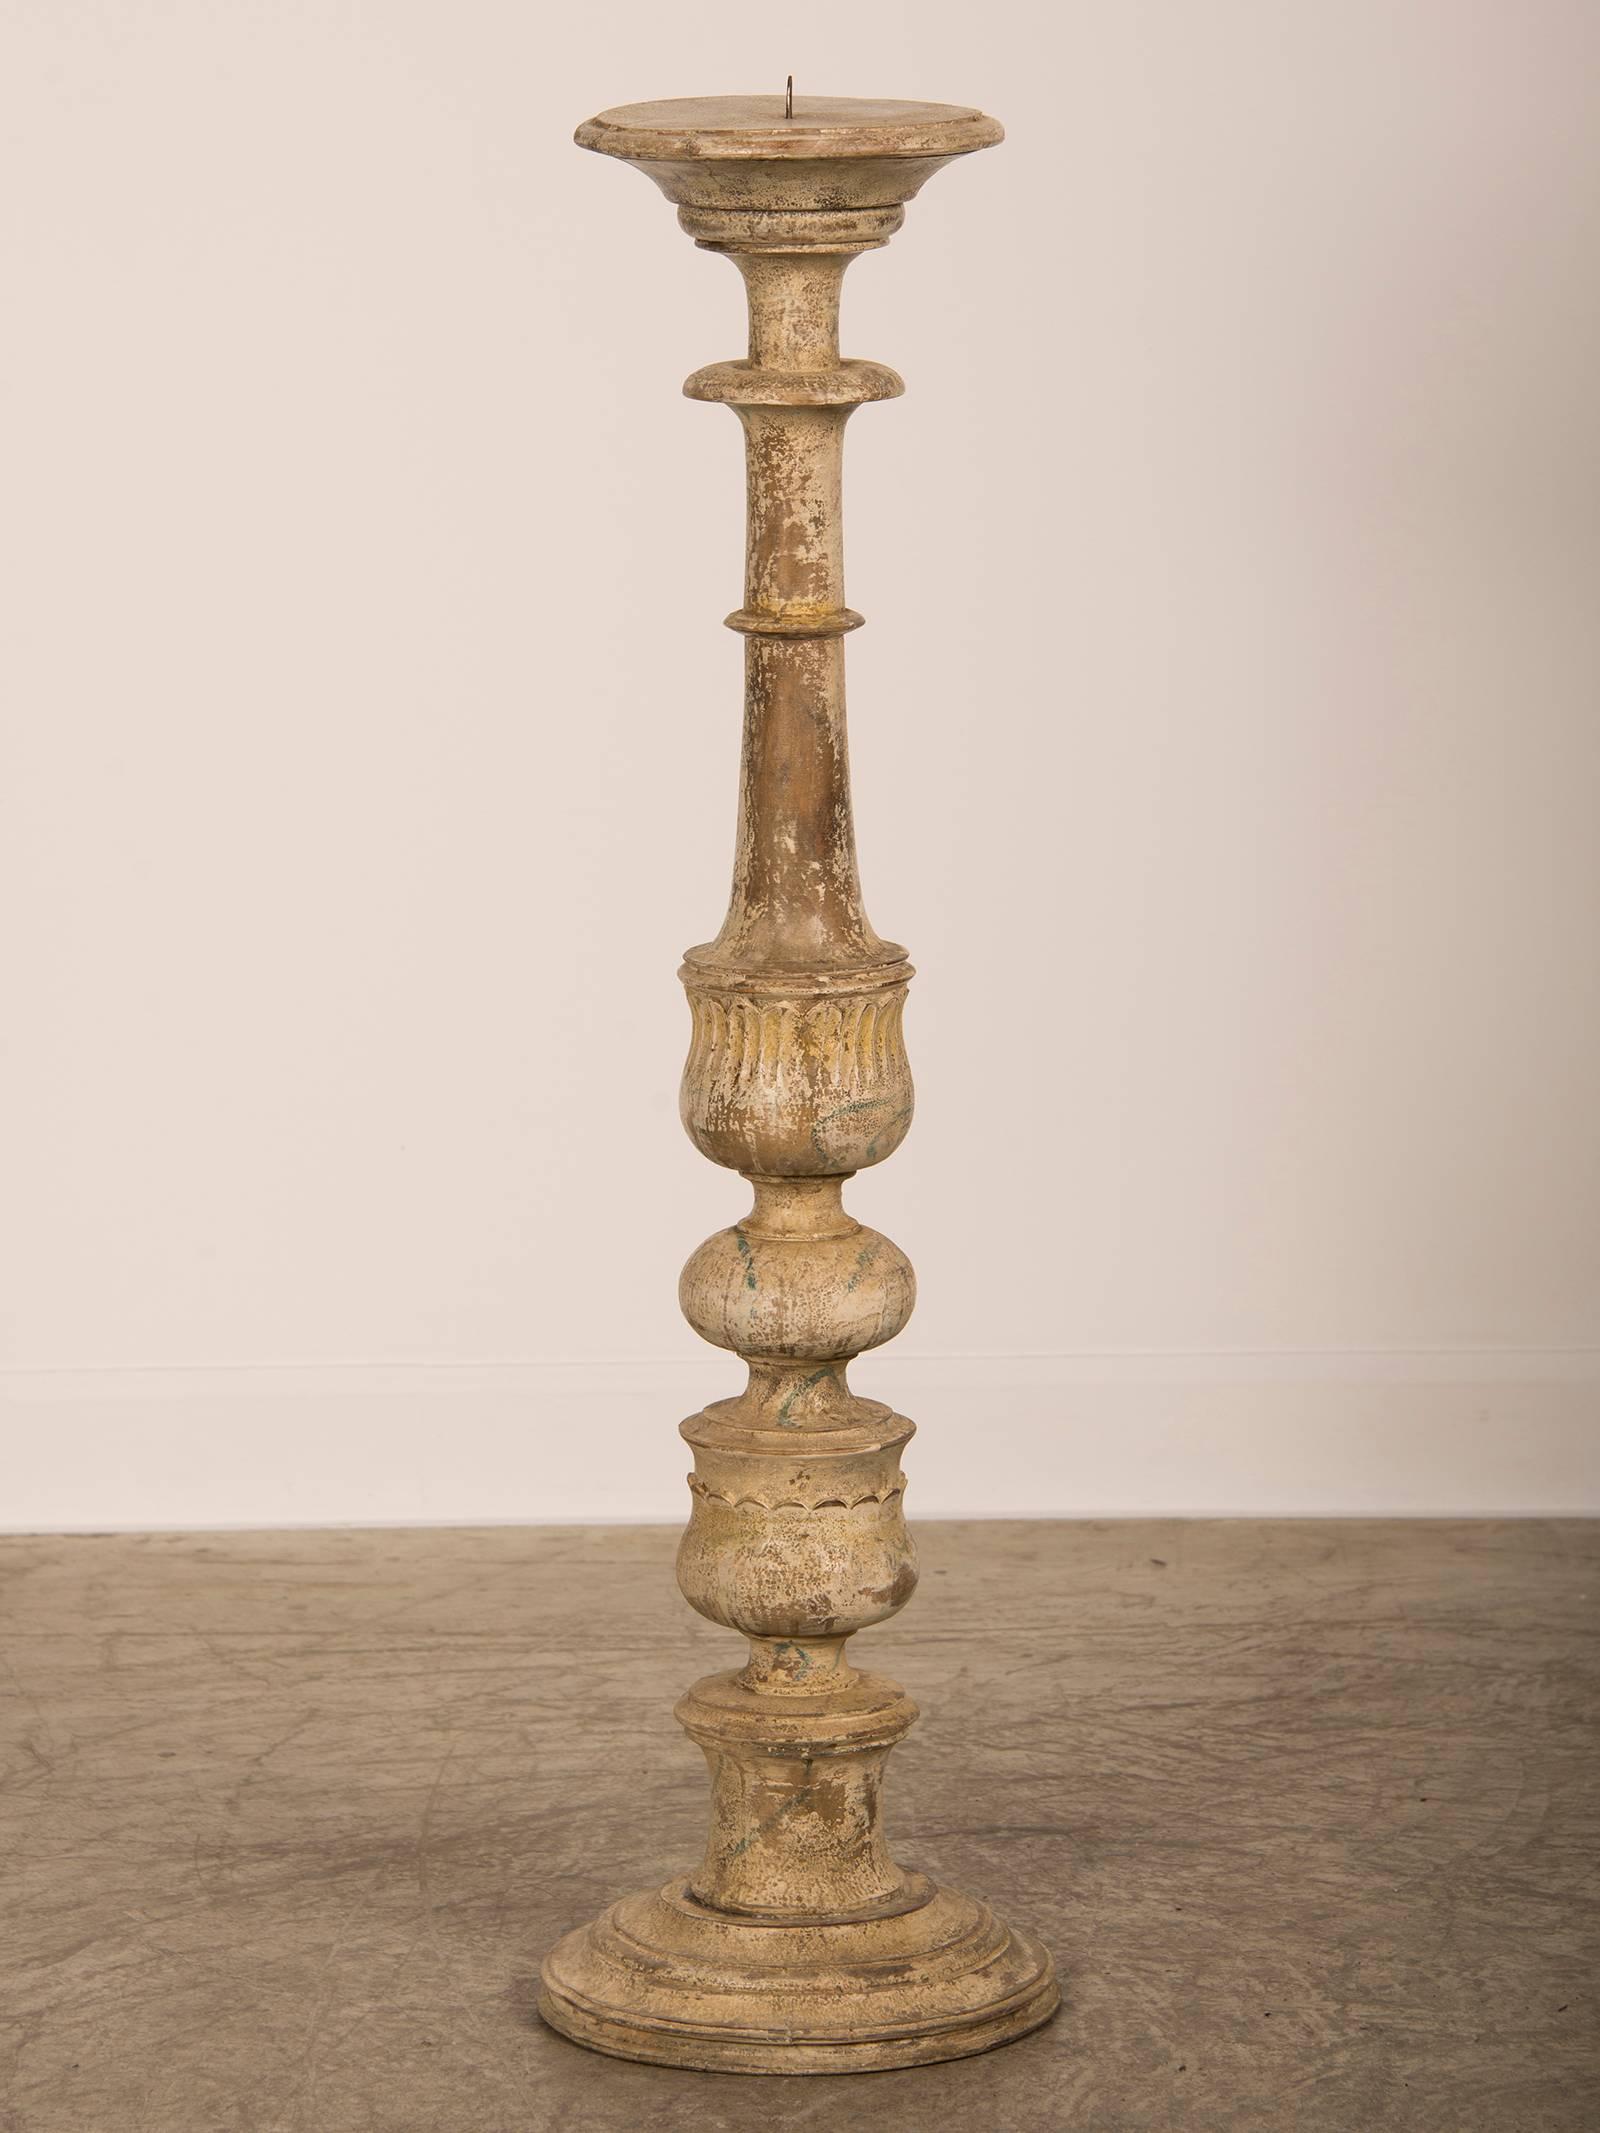 Receive our new selections direct from 1stdibs by email each week. Please click on “Follow Dealer” button below and see them first!

A pair of vintage Italian painted candlesticks having a substantial turned column shape with an iron spike to